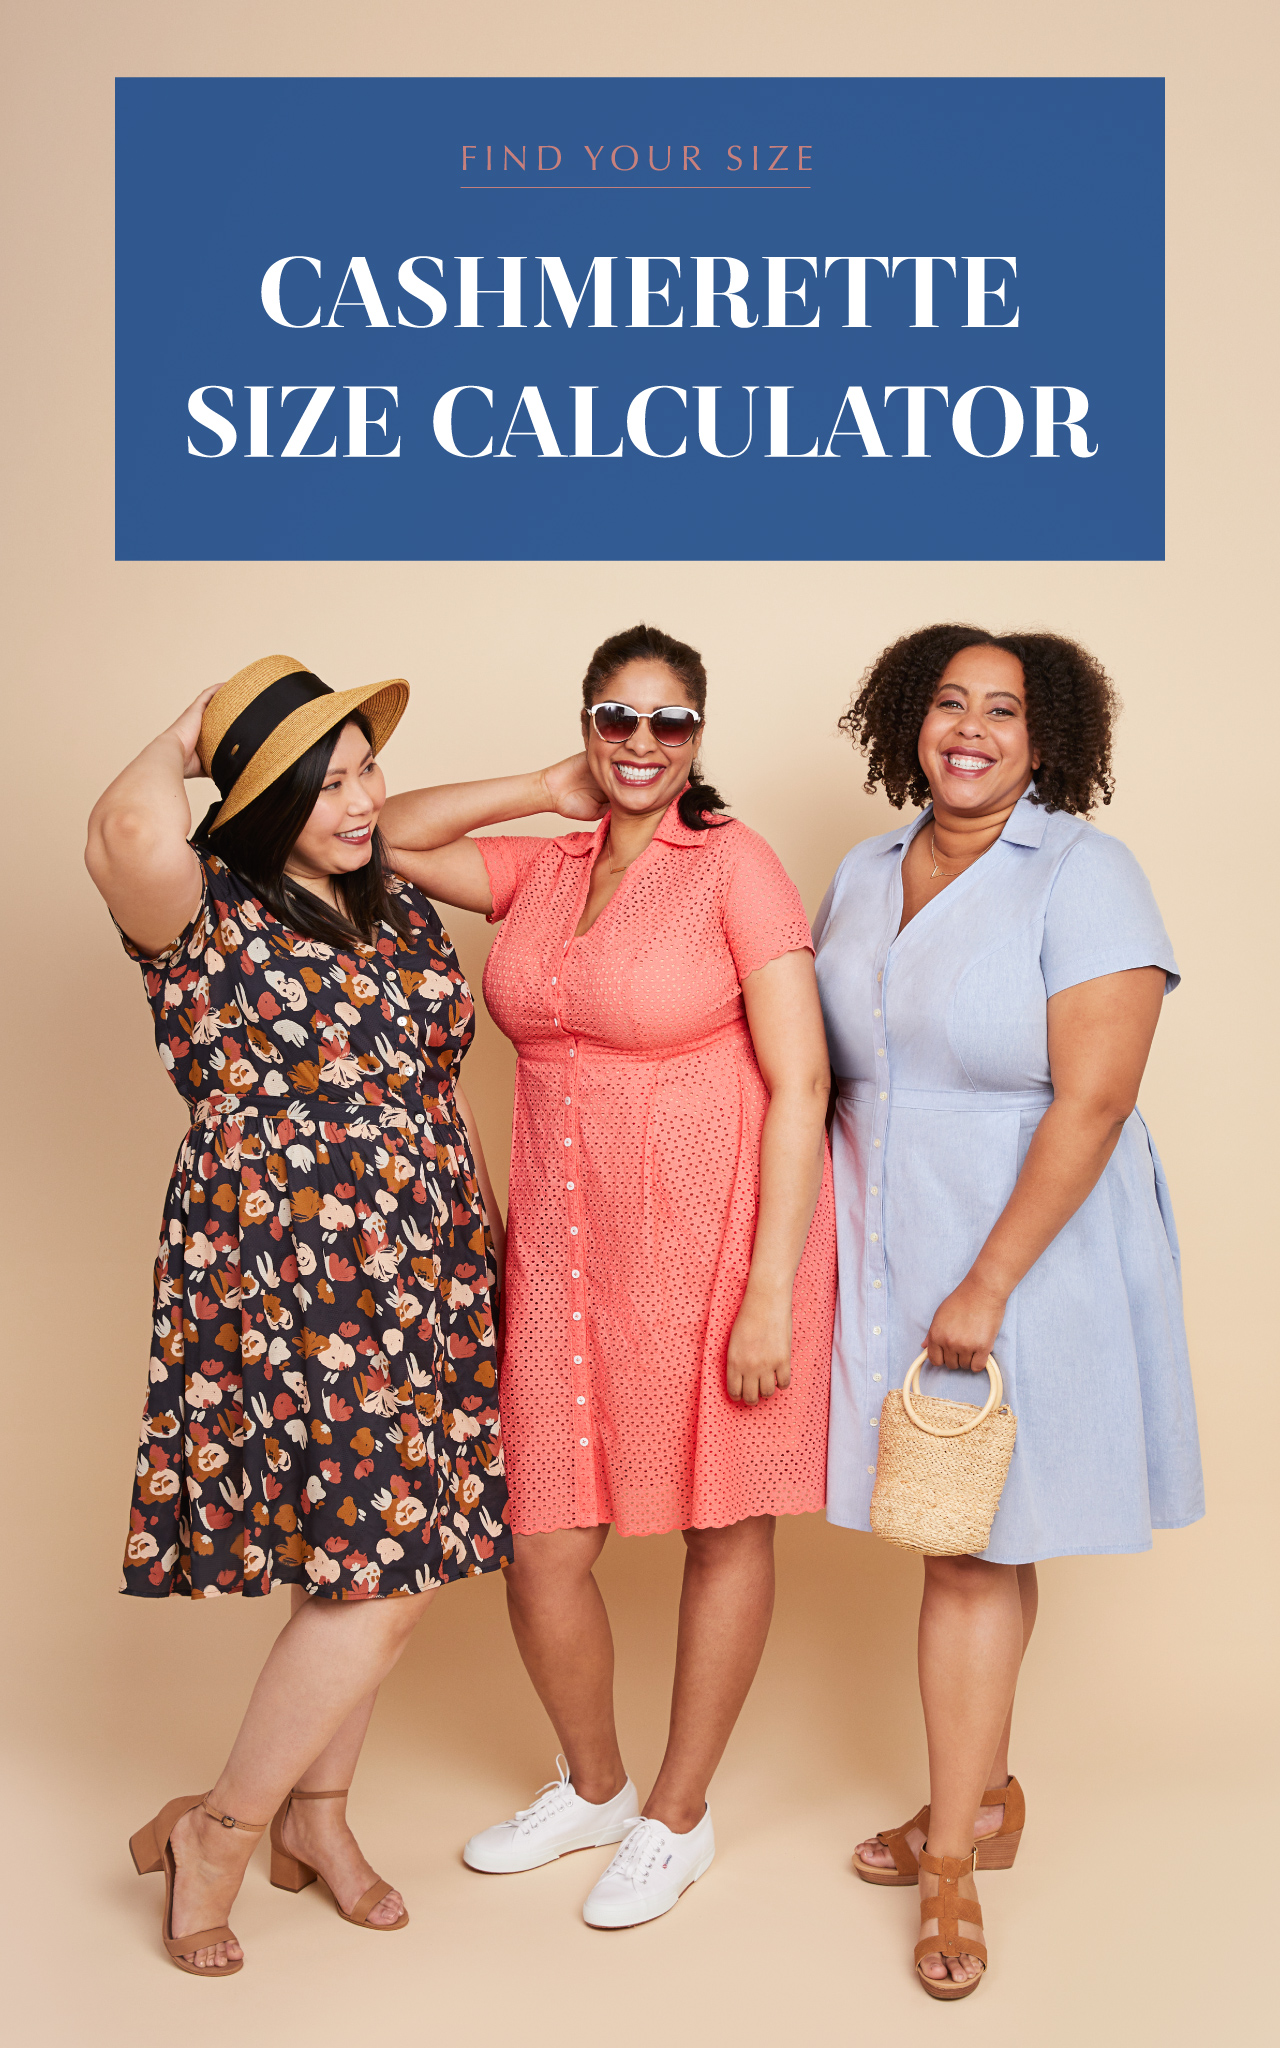 the-easiest-way-to-find-your-size-cashmerette-size-calculator